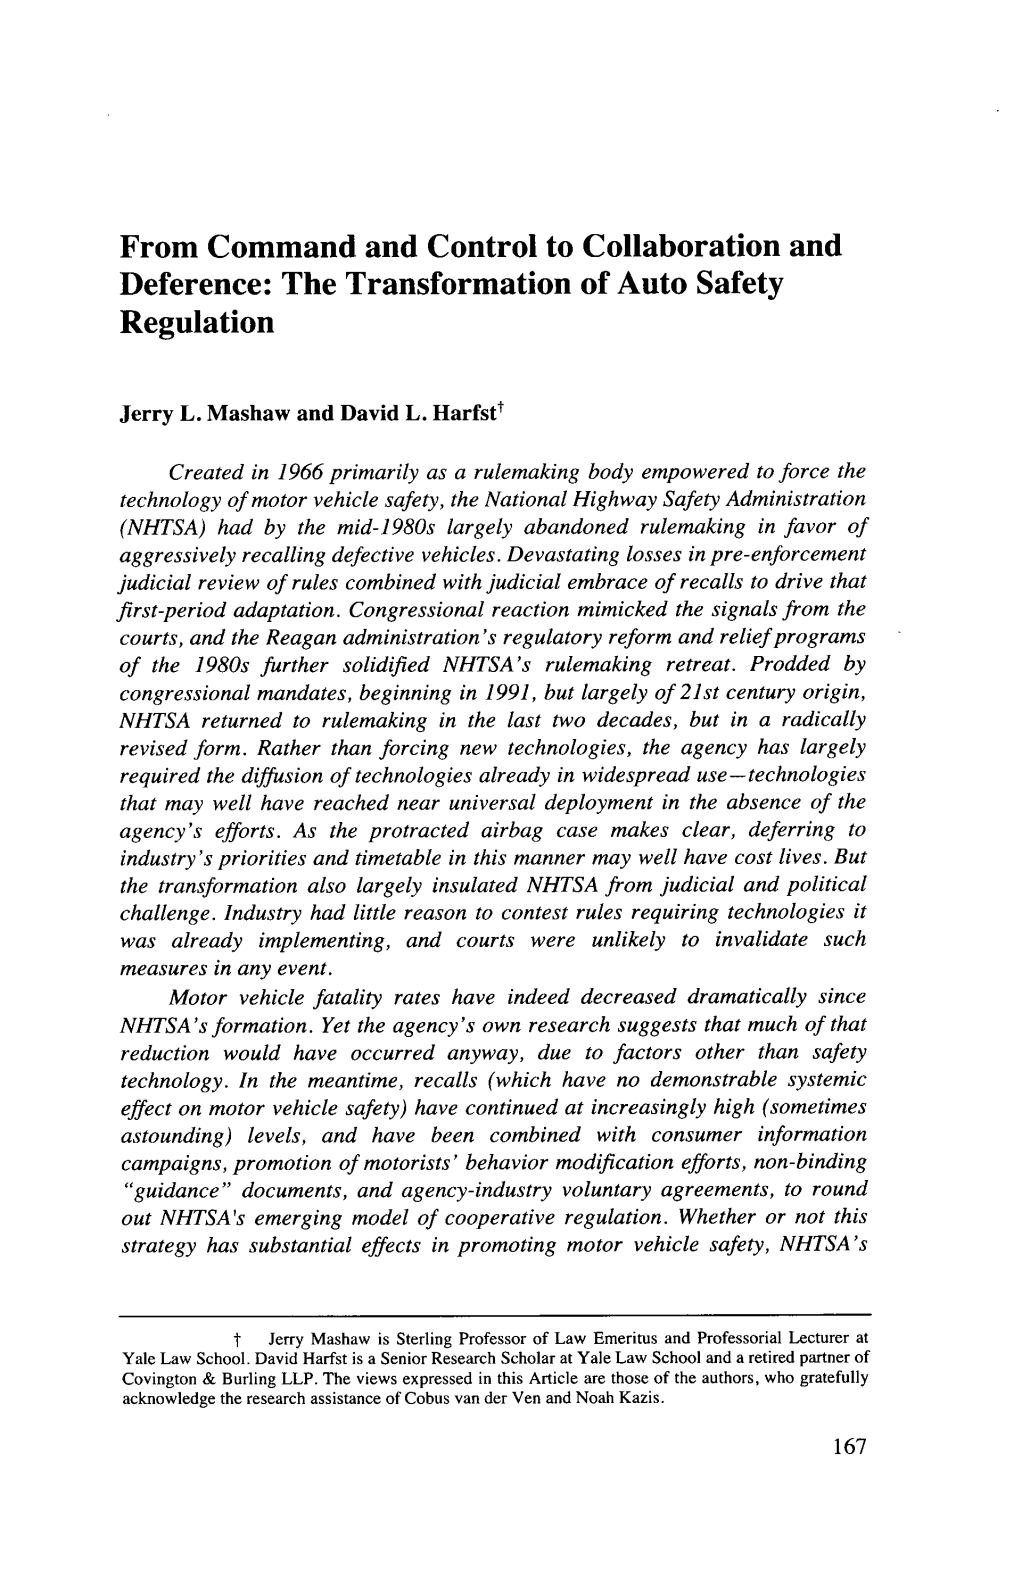 The Transformation of Auto Safety Regulation